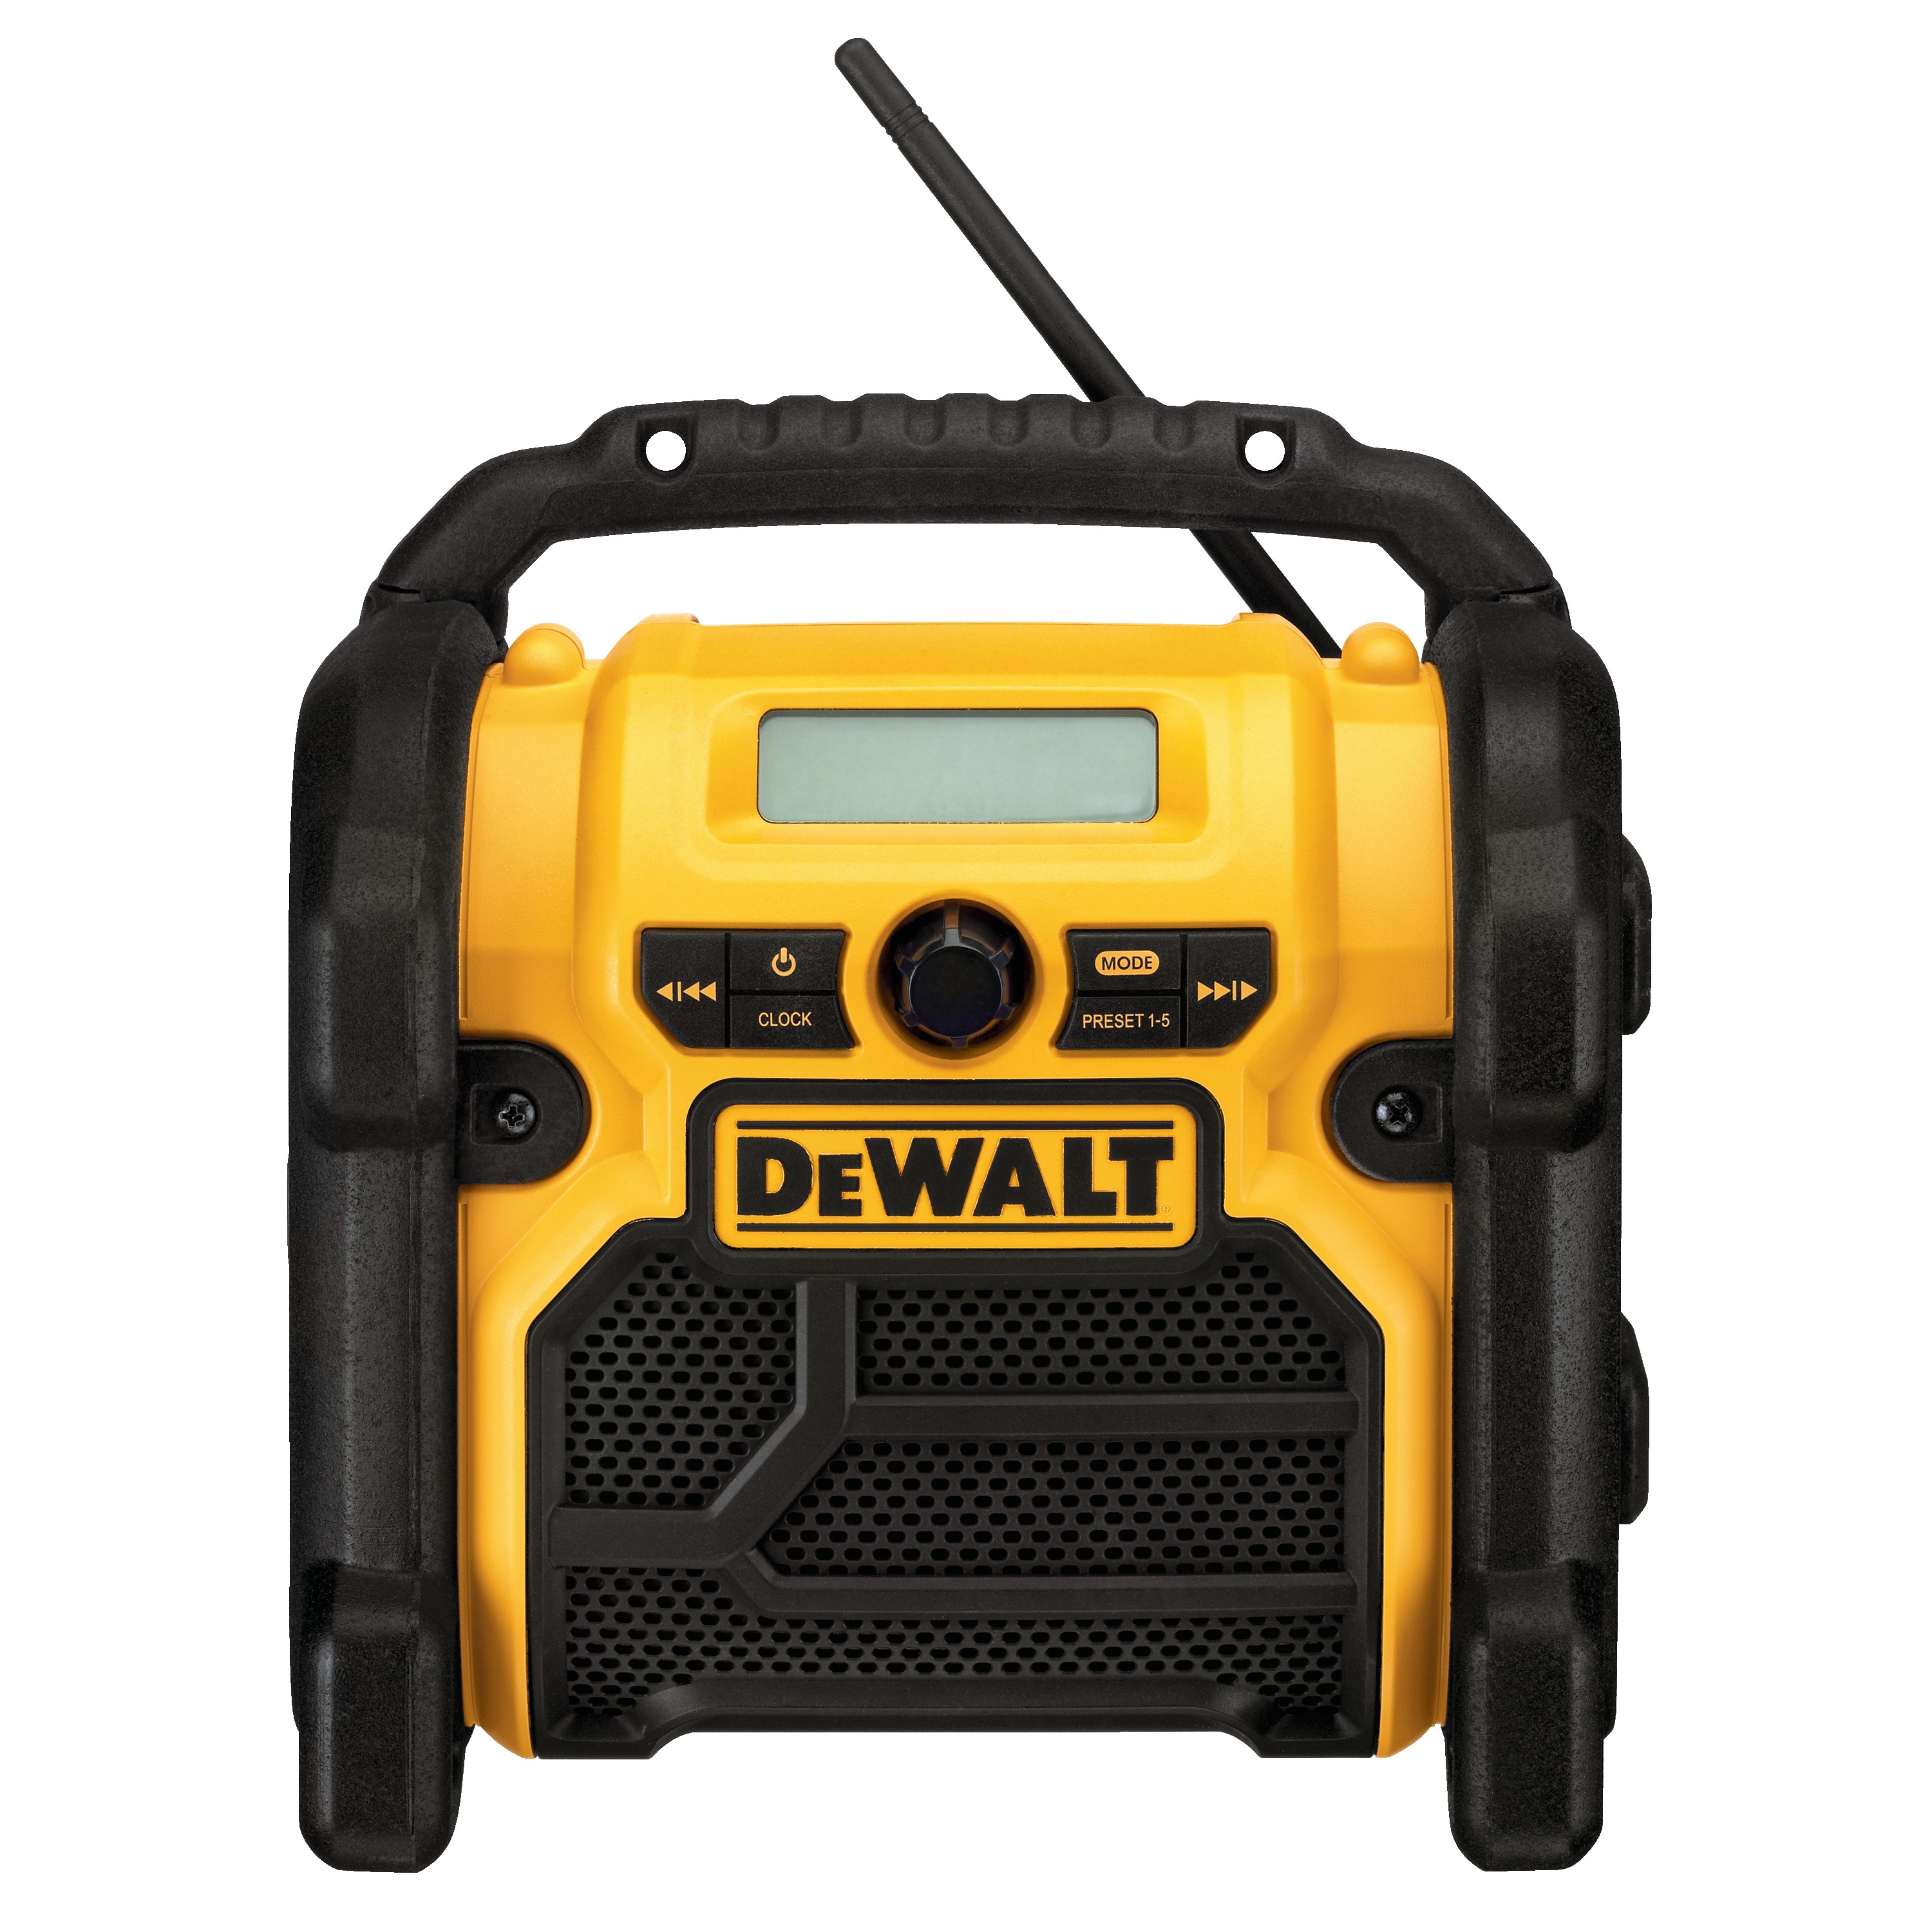 Profile of Compact Worksite Radio.